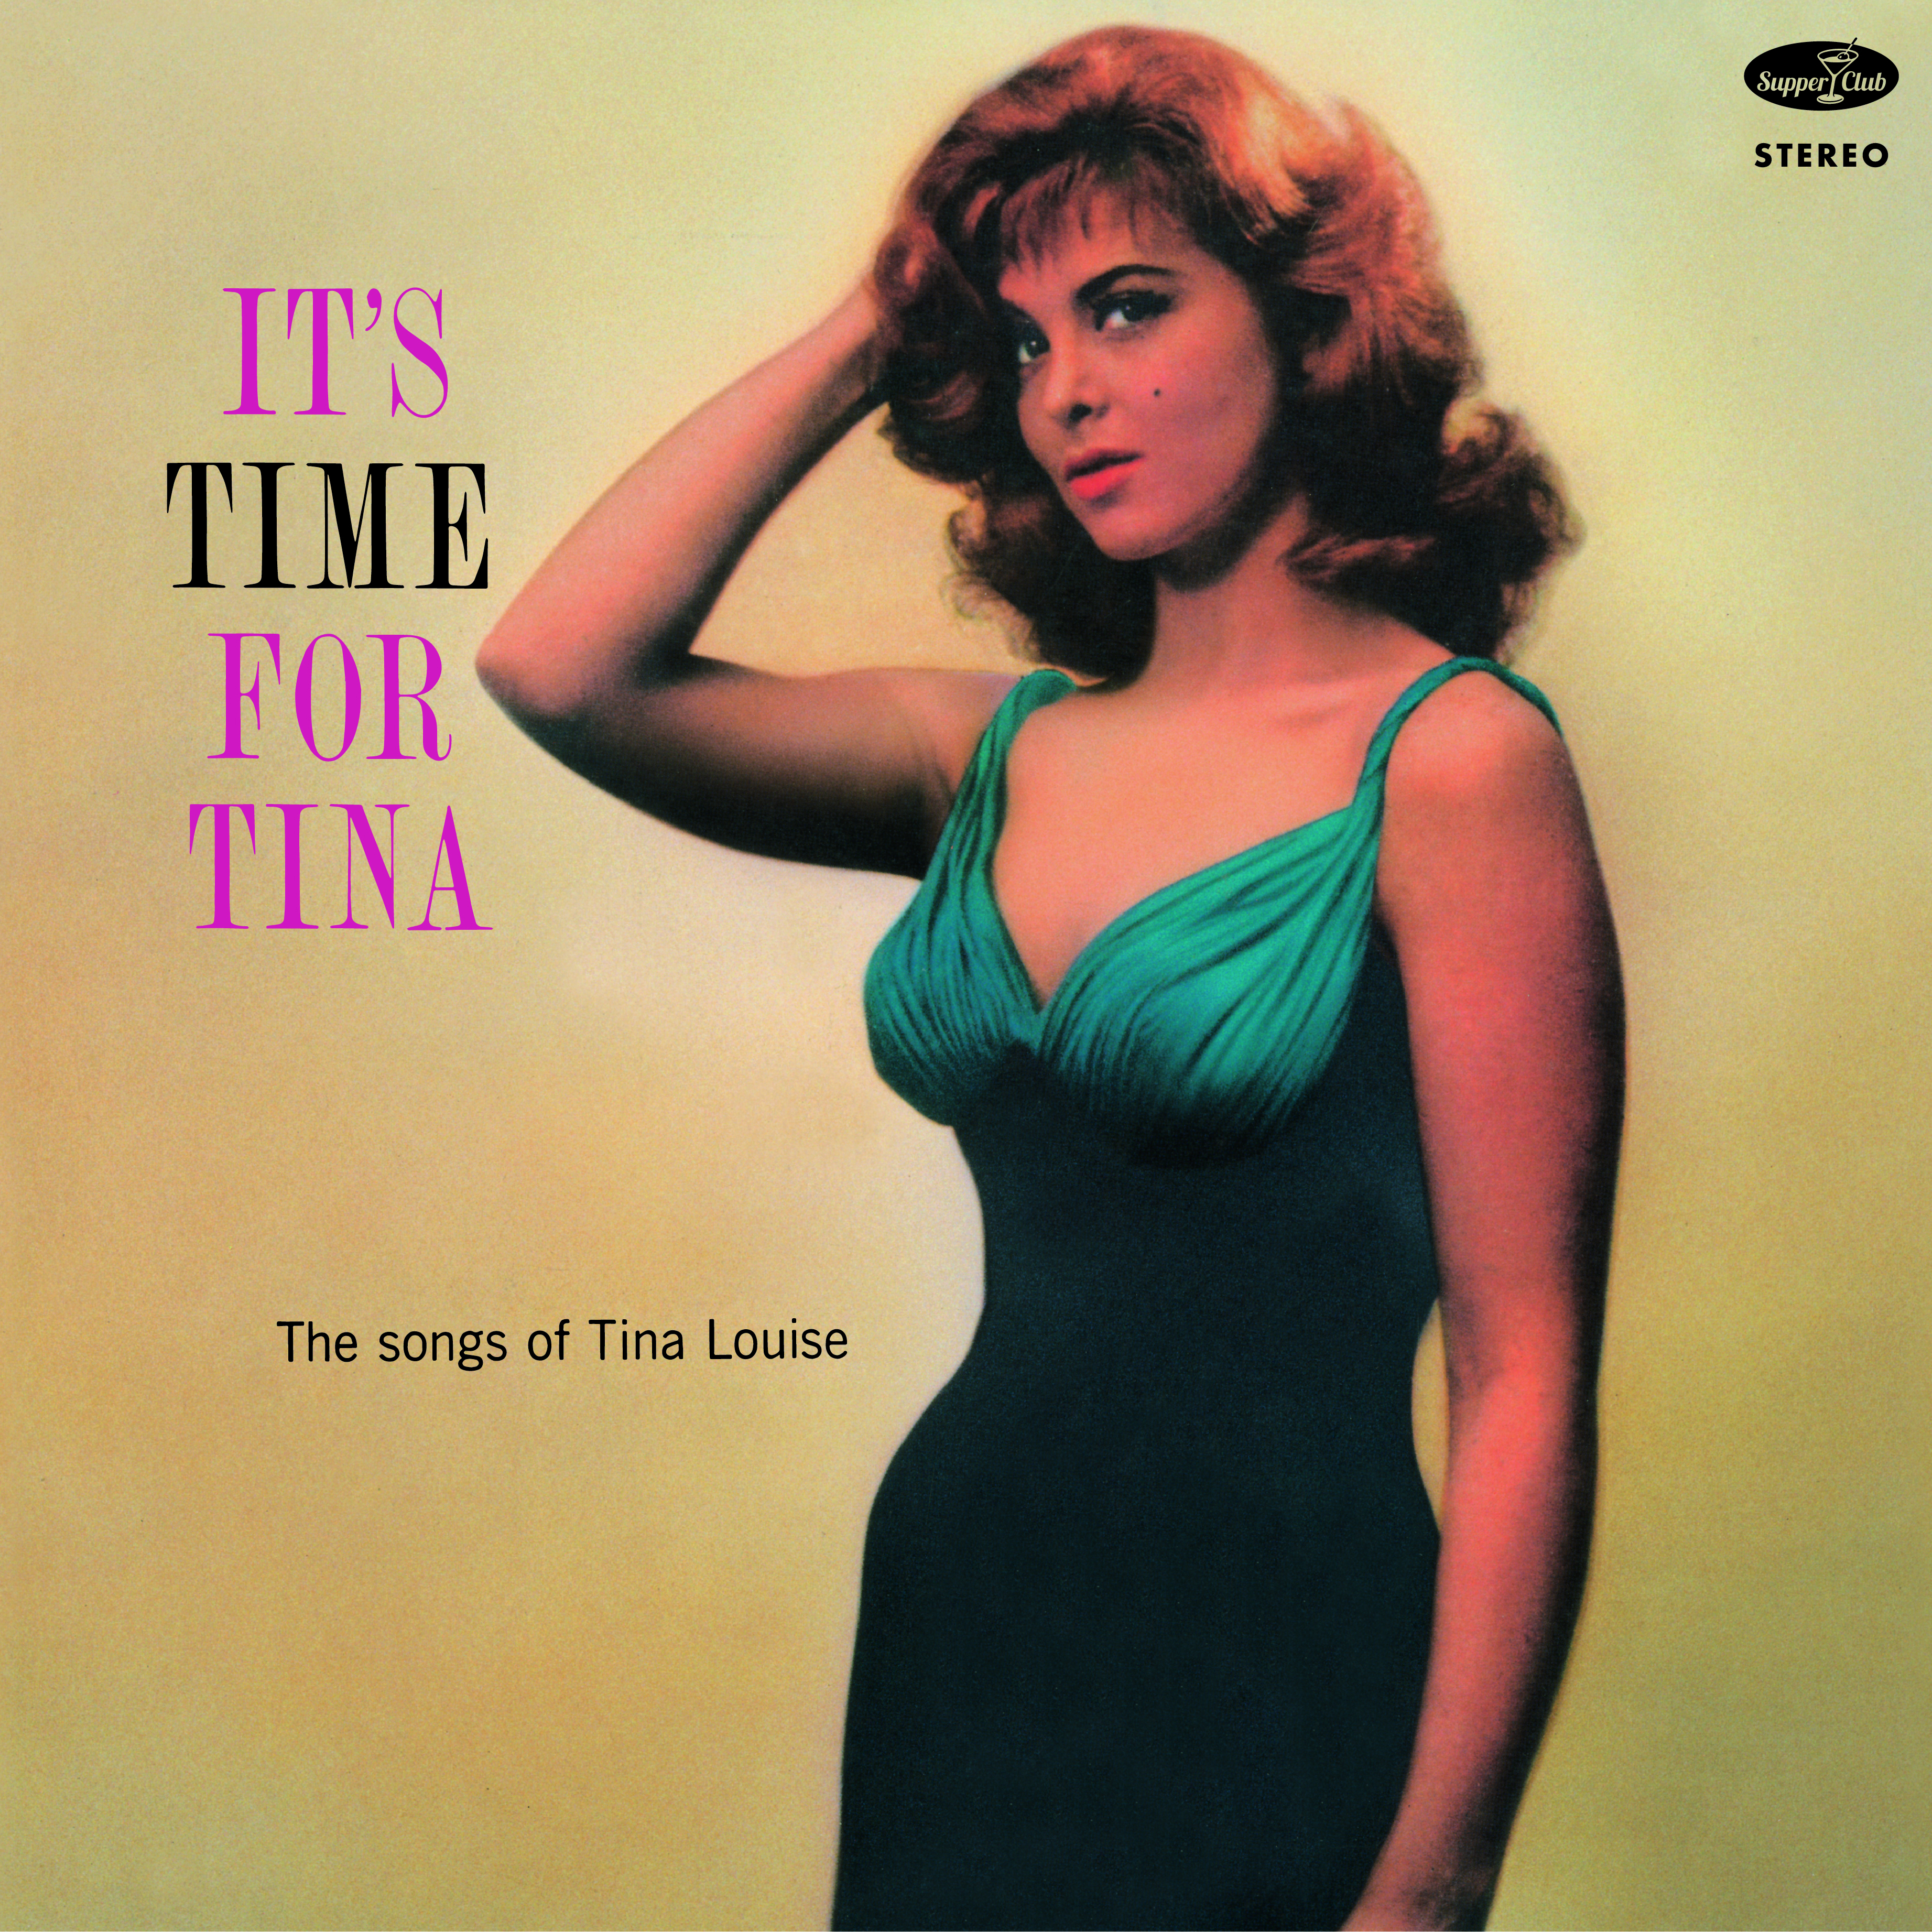 Tina Louise It's Time for Tina: The Songs of Tina Louise (Vinyl) (US IMPORT) - Photo 1/1